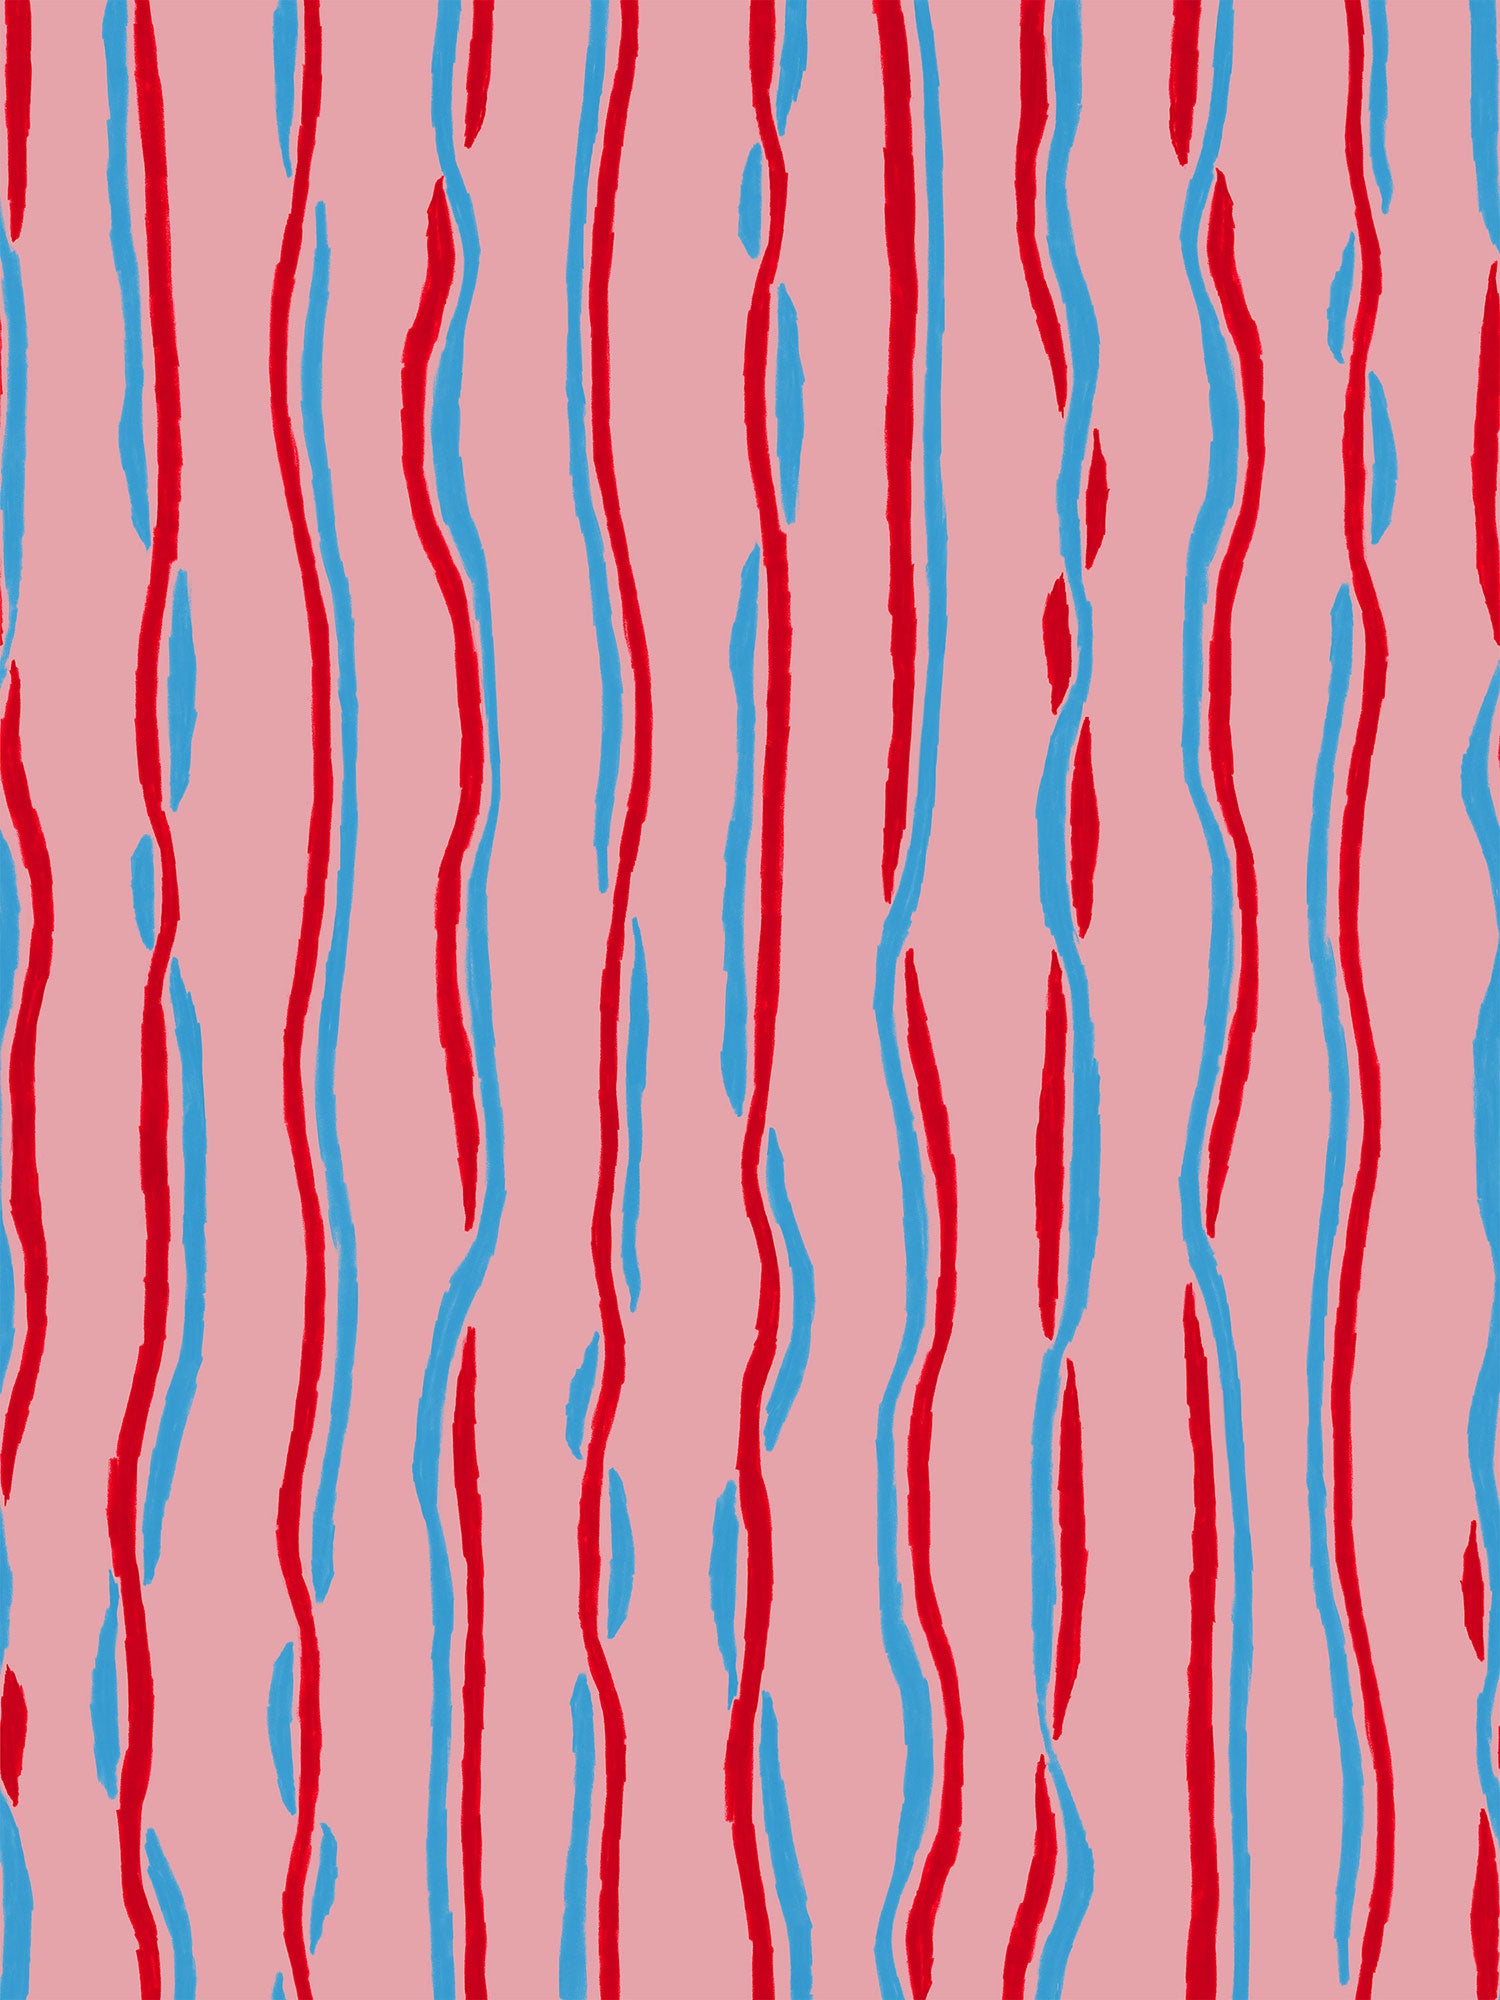 Pink wallpaper with vertical ribbons stripes in blue and red